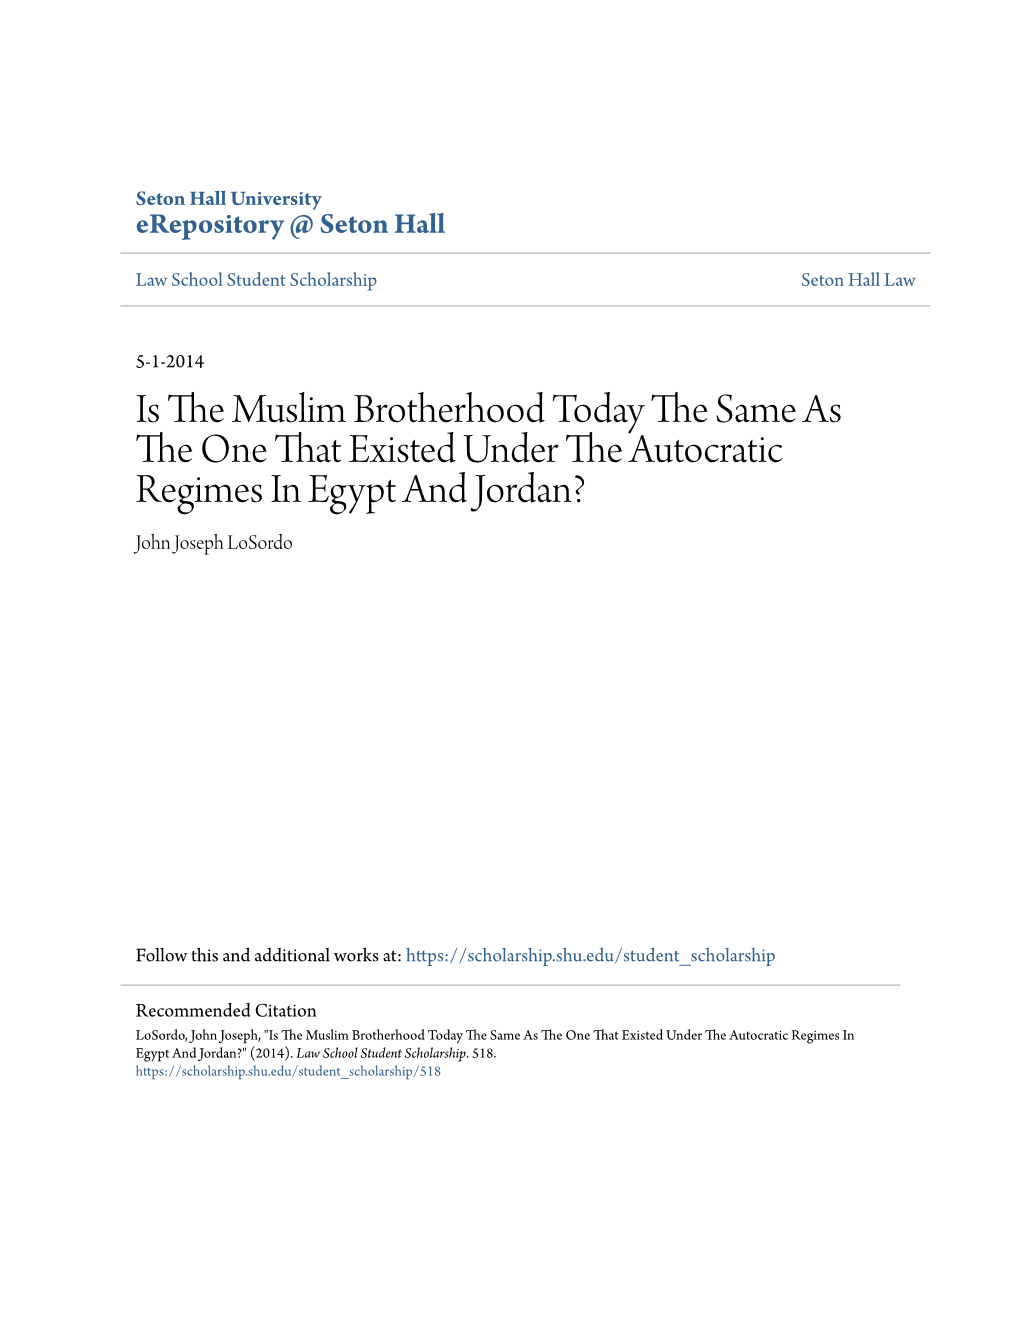 Is the Muslim Brotherhood Today the Same As the One That Existed Under the Autocratic Regimes in Egypt and Jordan?